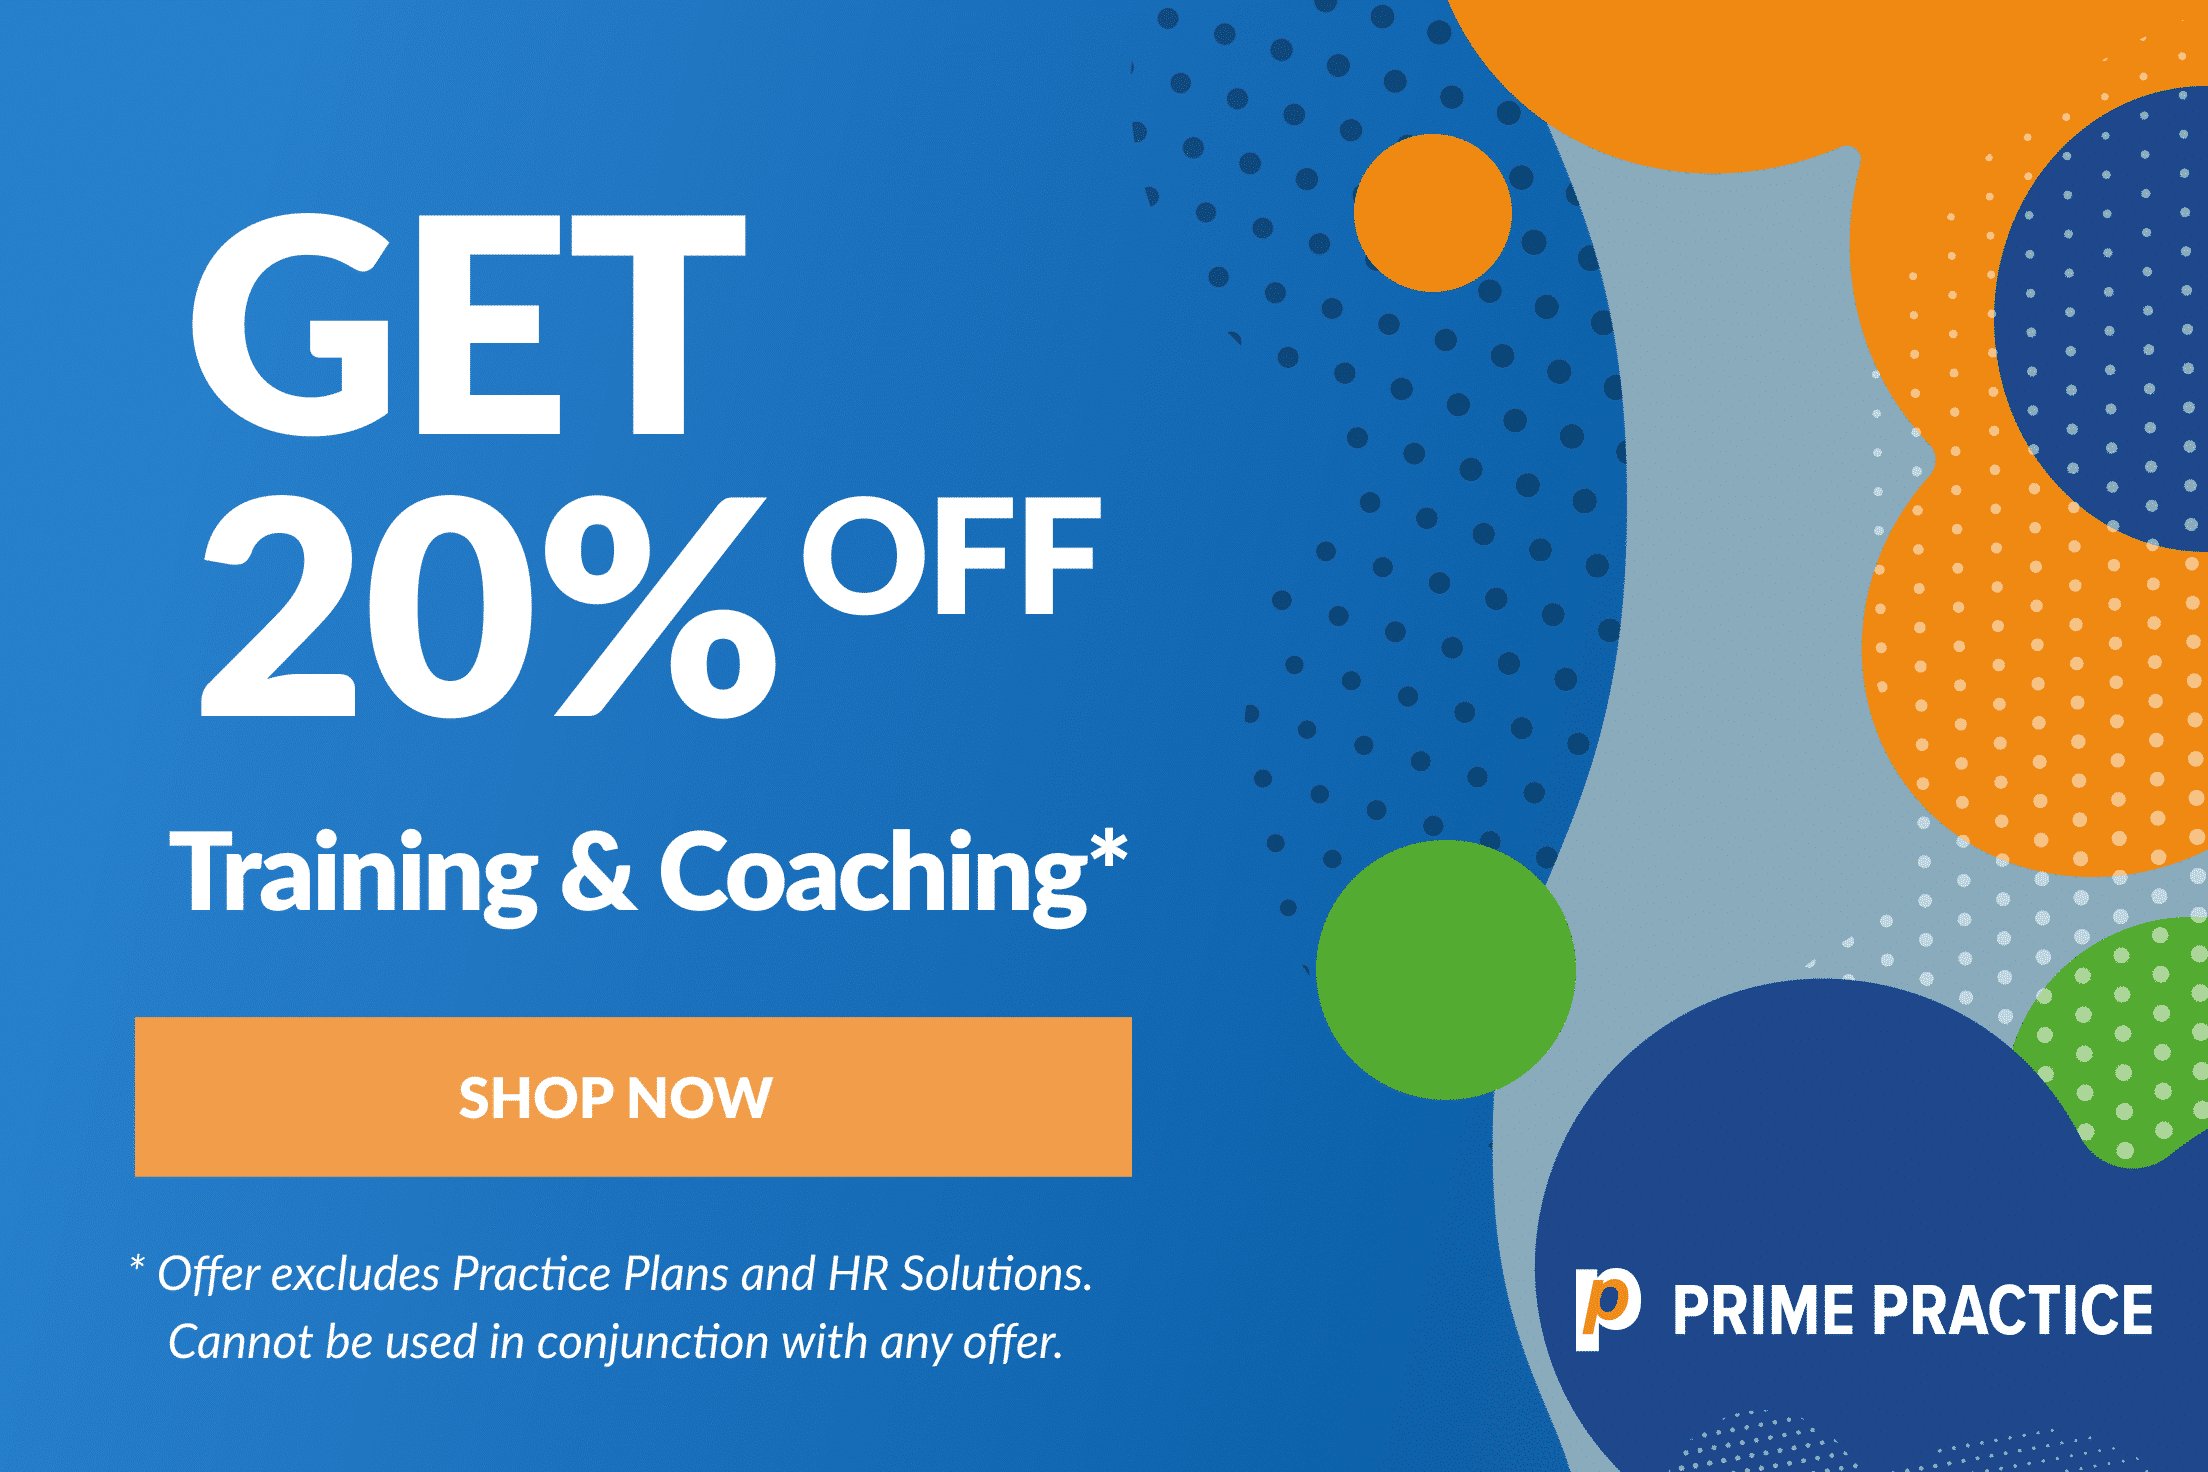 Get 20% off Training and Coaching*